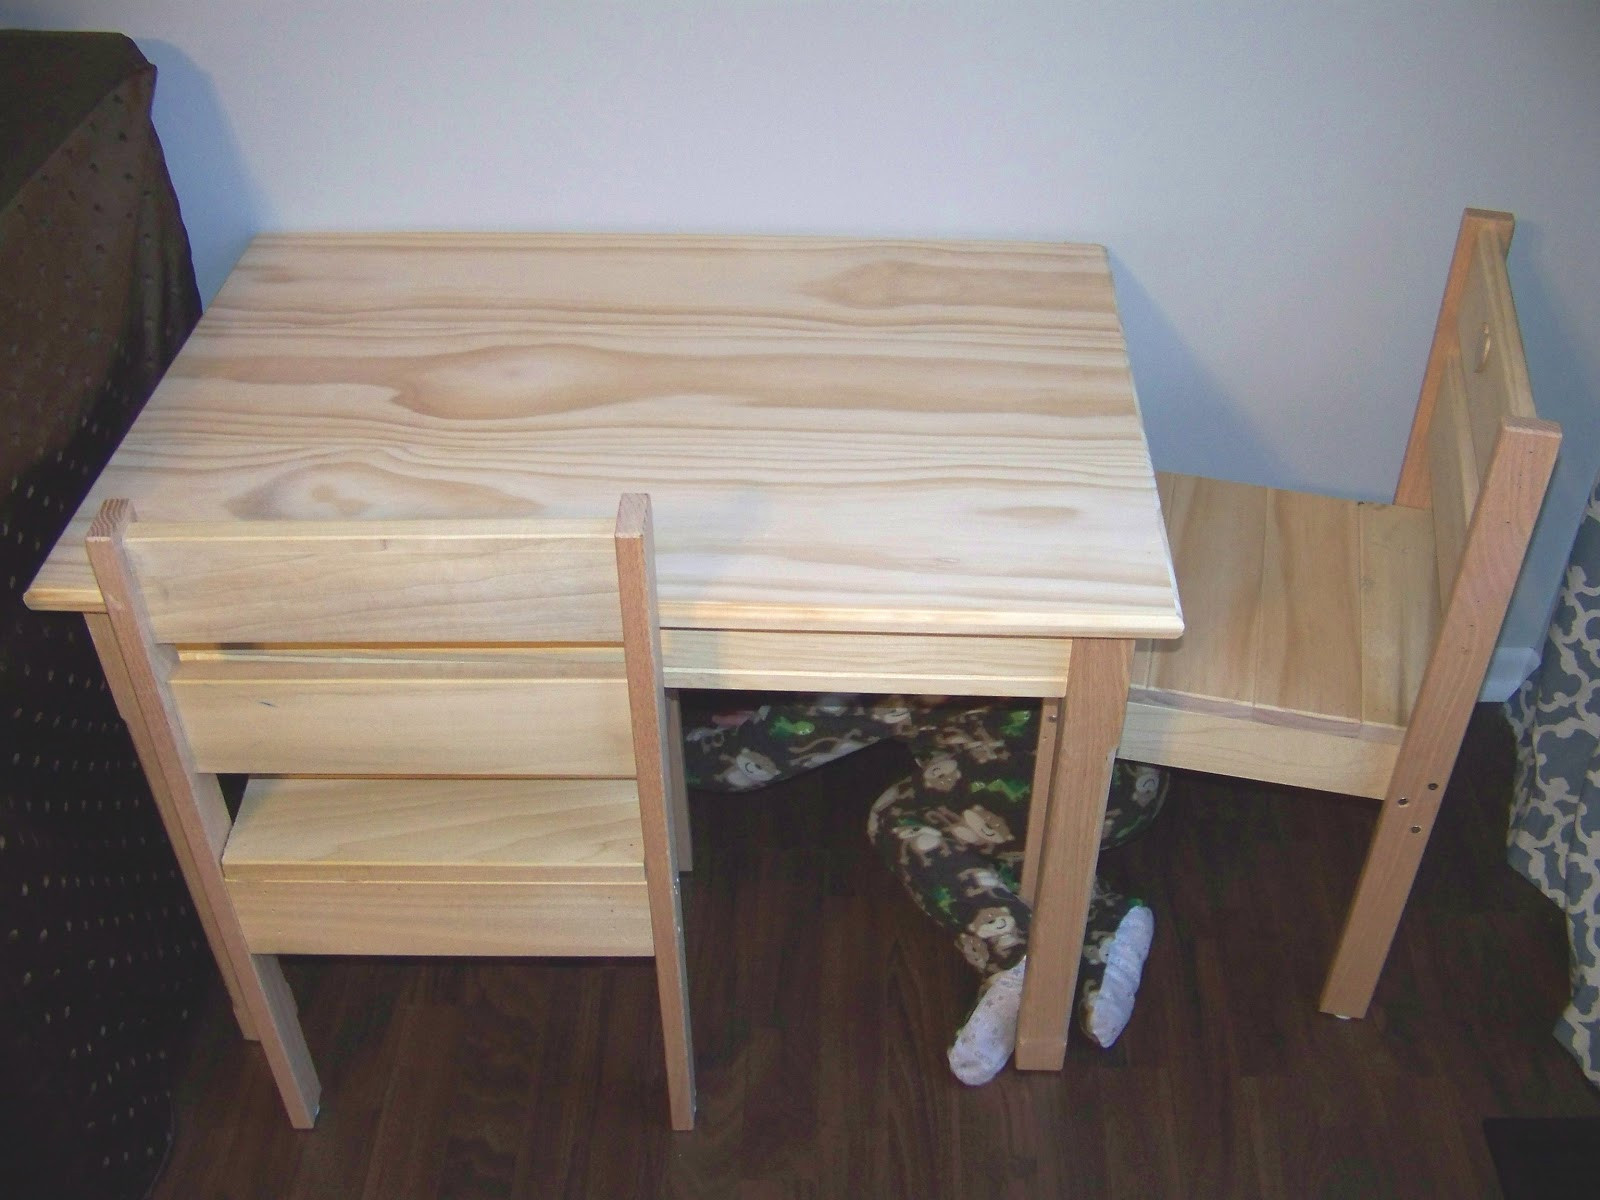 DIY Toddler Table And Chairs
 Baby Bear Necessities DIY Kid size Table & Chairs